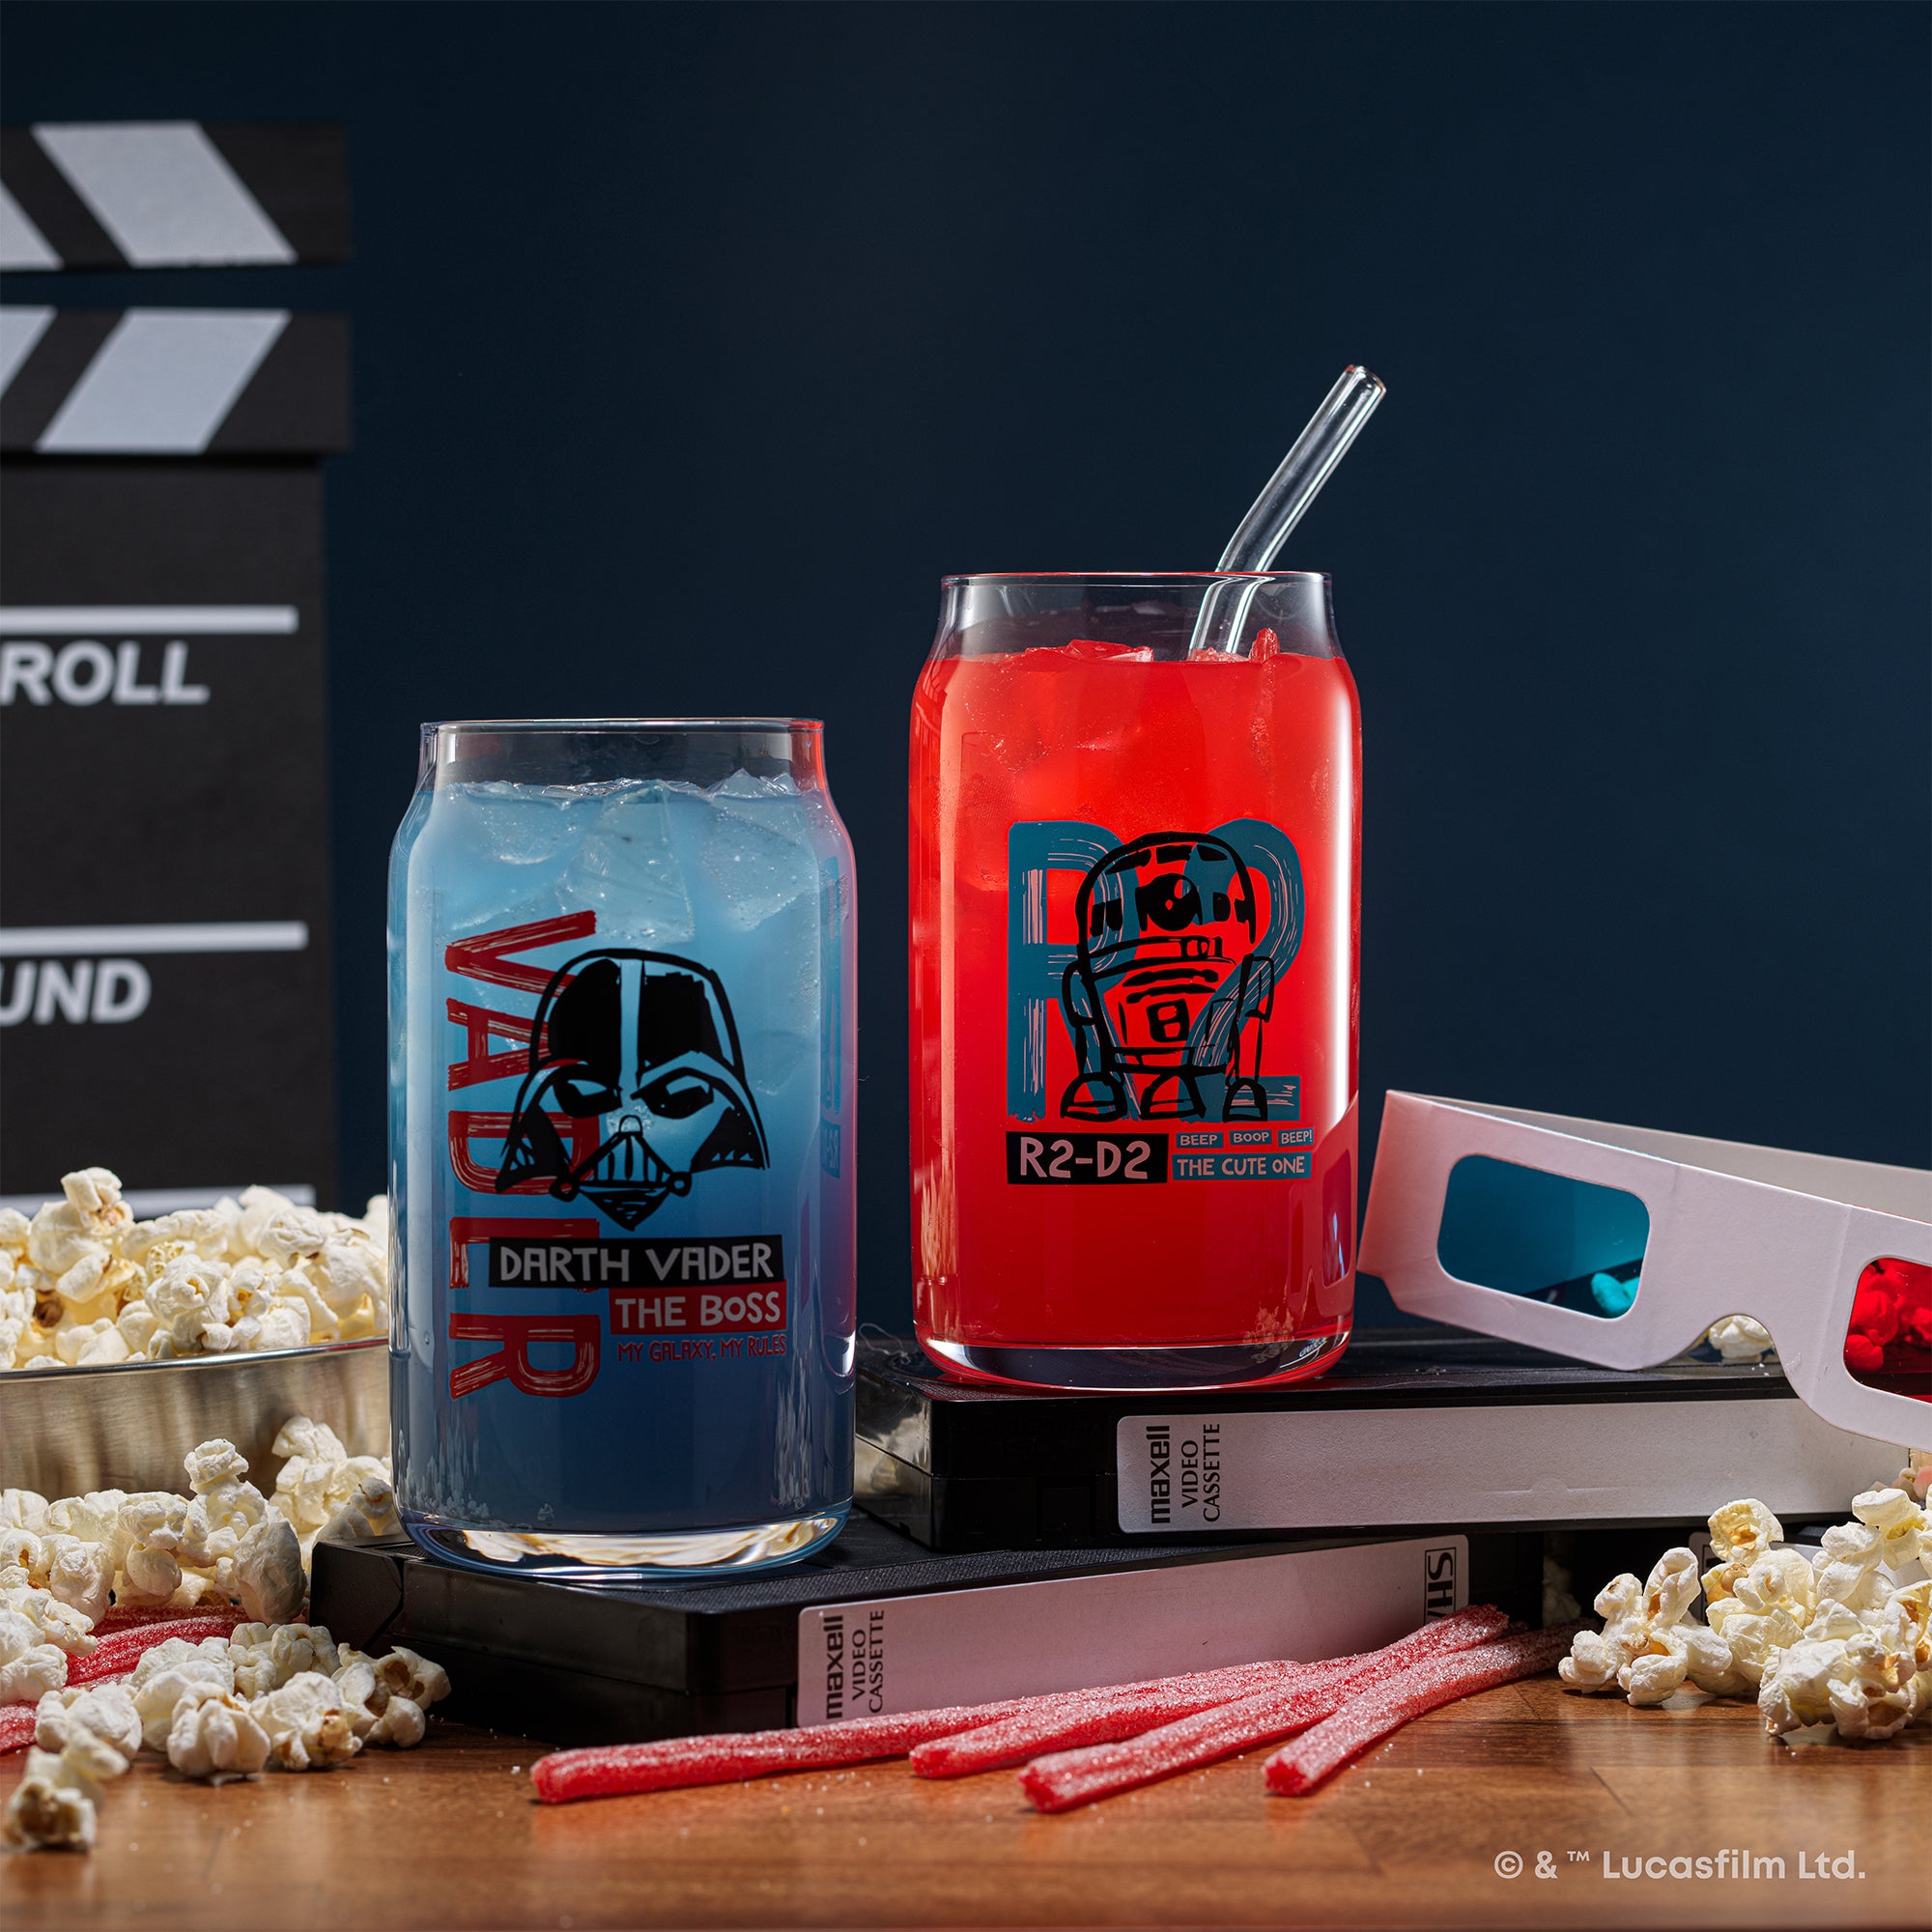 JoyJolt's Star Wars 'Now Playing' glass tumbler set featuring Darth Vadar and R2-D2. R2-D2 glass is on two VHS tapes and 3D glasses next to it. The glasses are surrounded by popcorn and sour straw candy. 